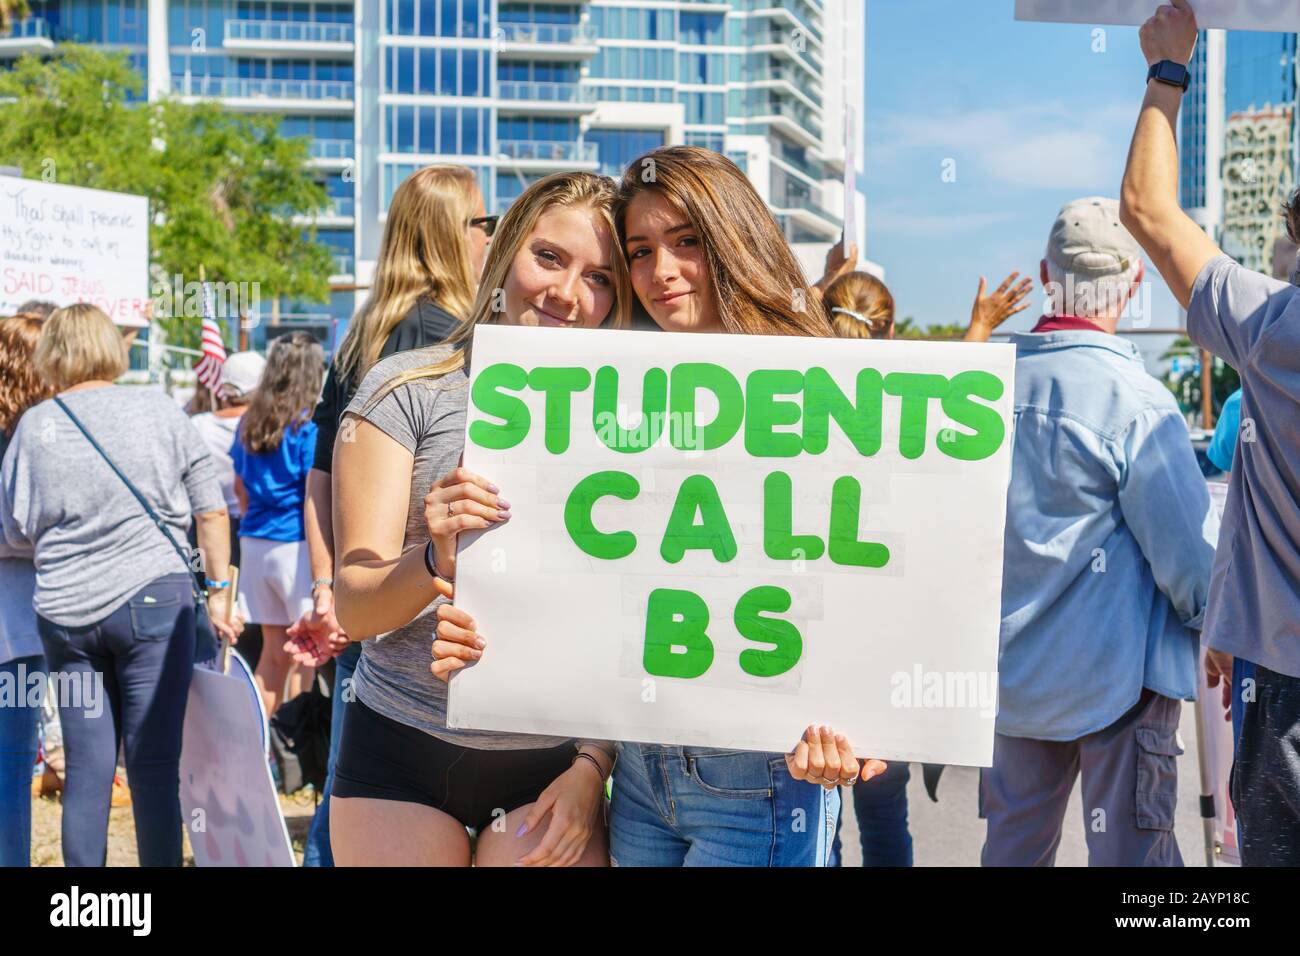 March 24, 2018/Sarasota,FL, USA-Teenage girls holds sign reading Students Call BS at anti-gun protest march after school shooting in Parkland. Stock Photo